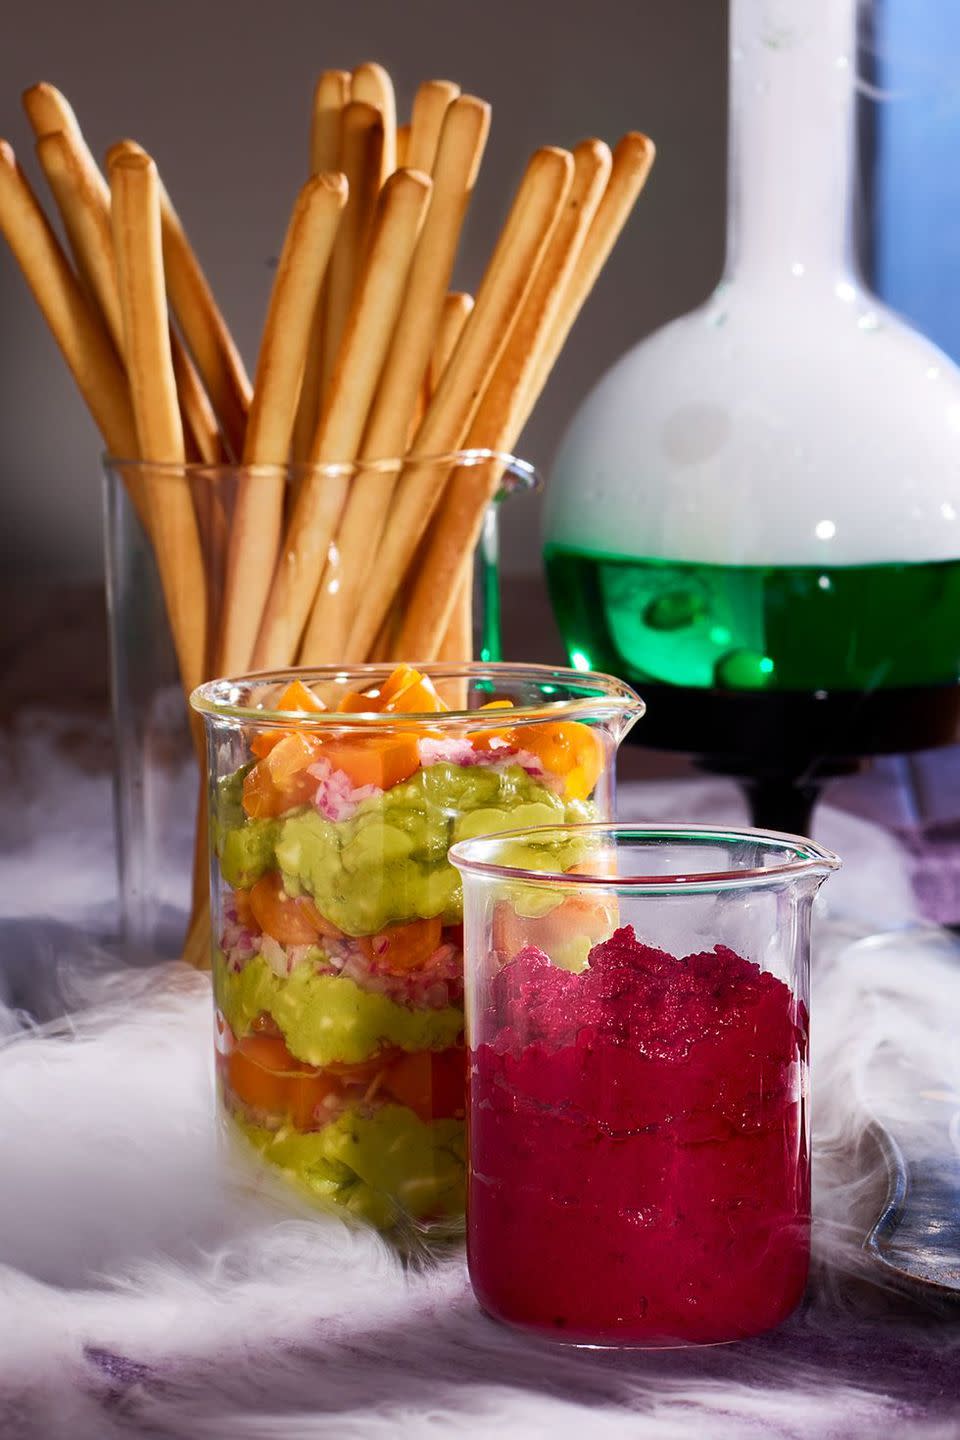 <p>Presentation is everything. This mad scientist display for guacamole, beet hummus, romesco, and bread dips will get guests talking. </p><p><a class="link " href="https://www.amazon.com/Glass-Measuring-Beaker-100ml-Graduated/dp/B01J57WFF6?tag=syn-yahoo-20&ascsubtag=%5Bartid%7C10070.g.2574%5Bsrc%7Cyahoo-us" rel="nofollow noopener" target="_blank" data-ylk="slk:Shop Beakers">Shop Beakers</a></p>